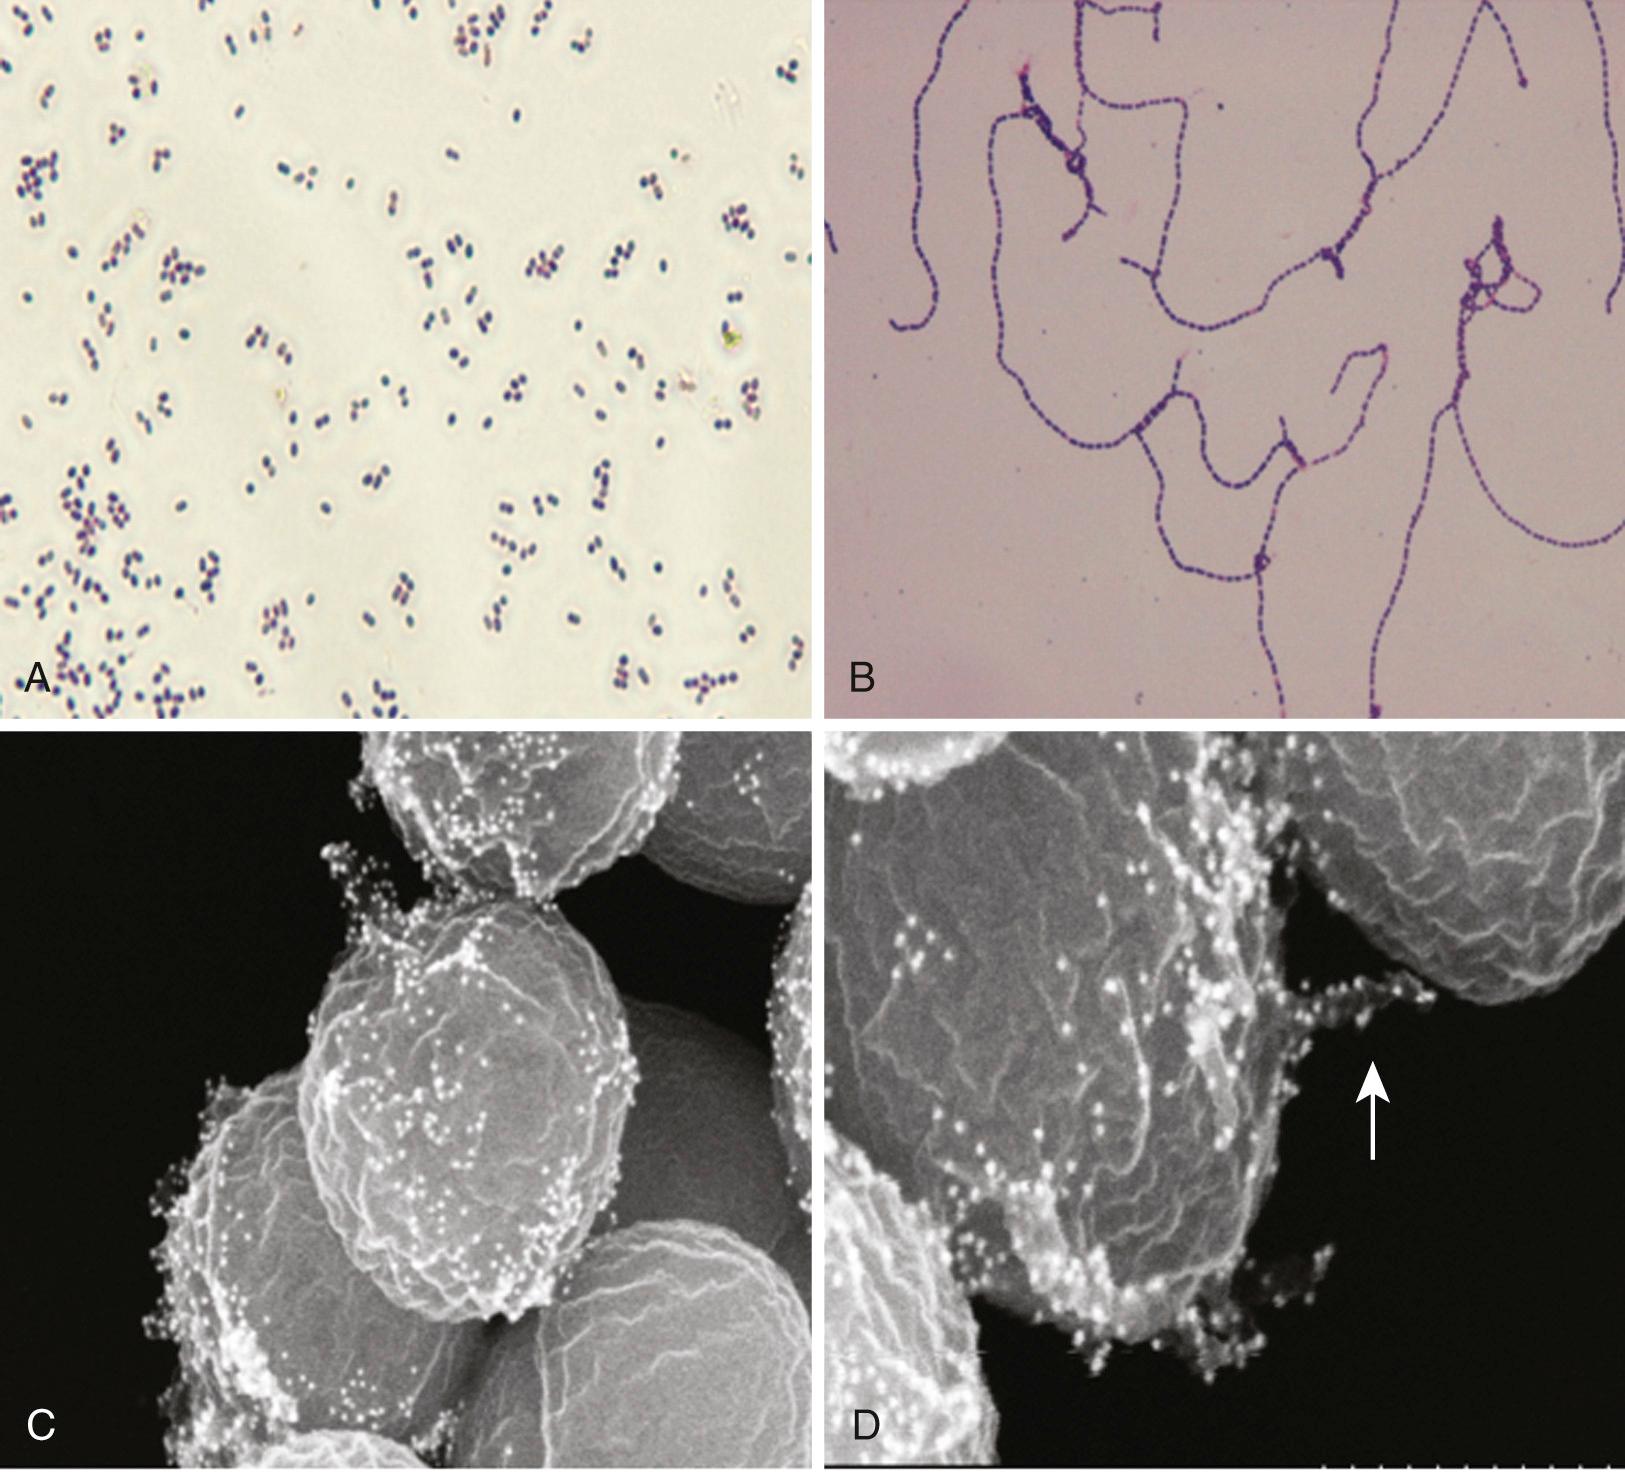 FIG. 200.1, Gram stain and scanning electron microscopy (SEM) of enterococcus faecalis isolates.